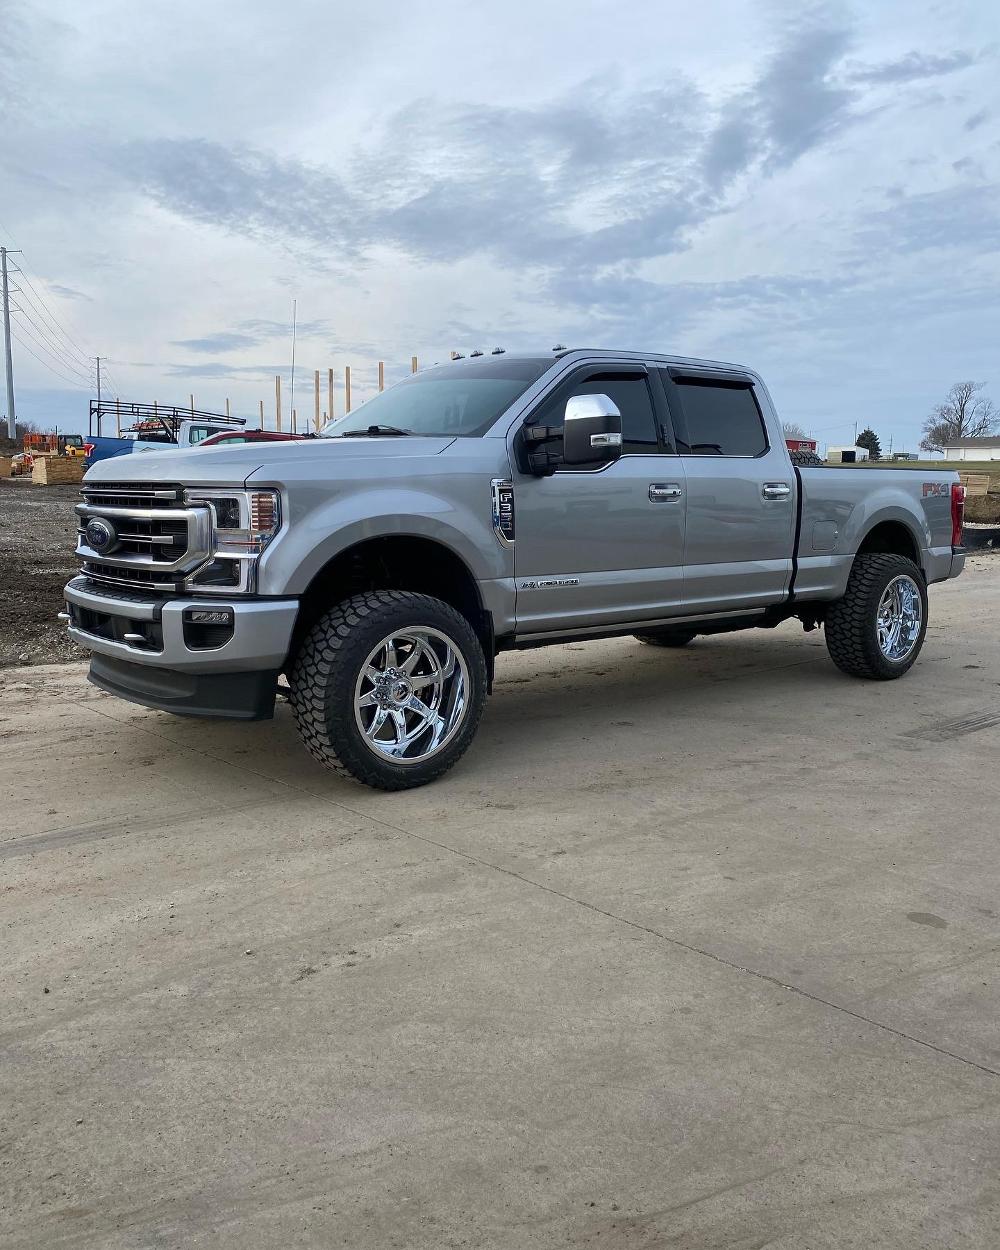 Ford F-350 Super Duty Hammer - D748